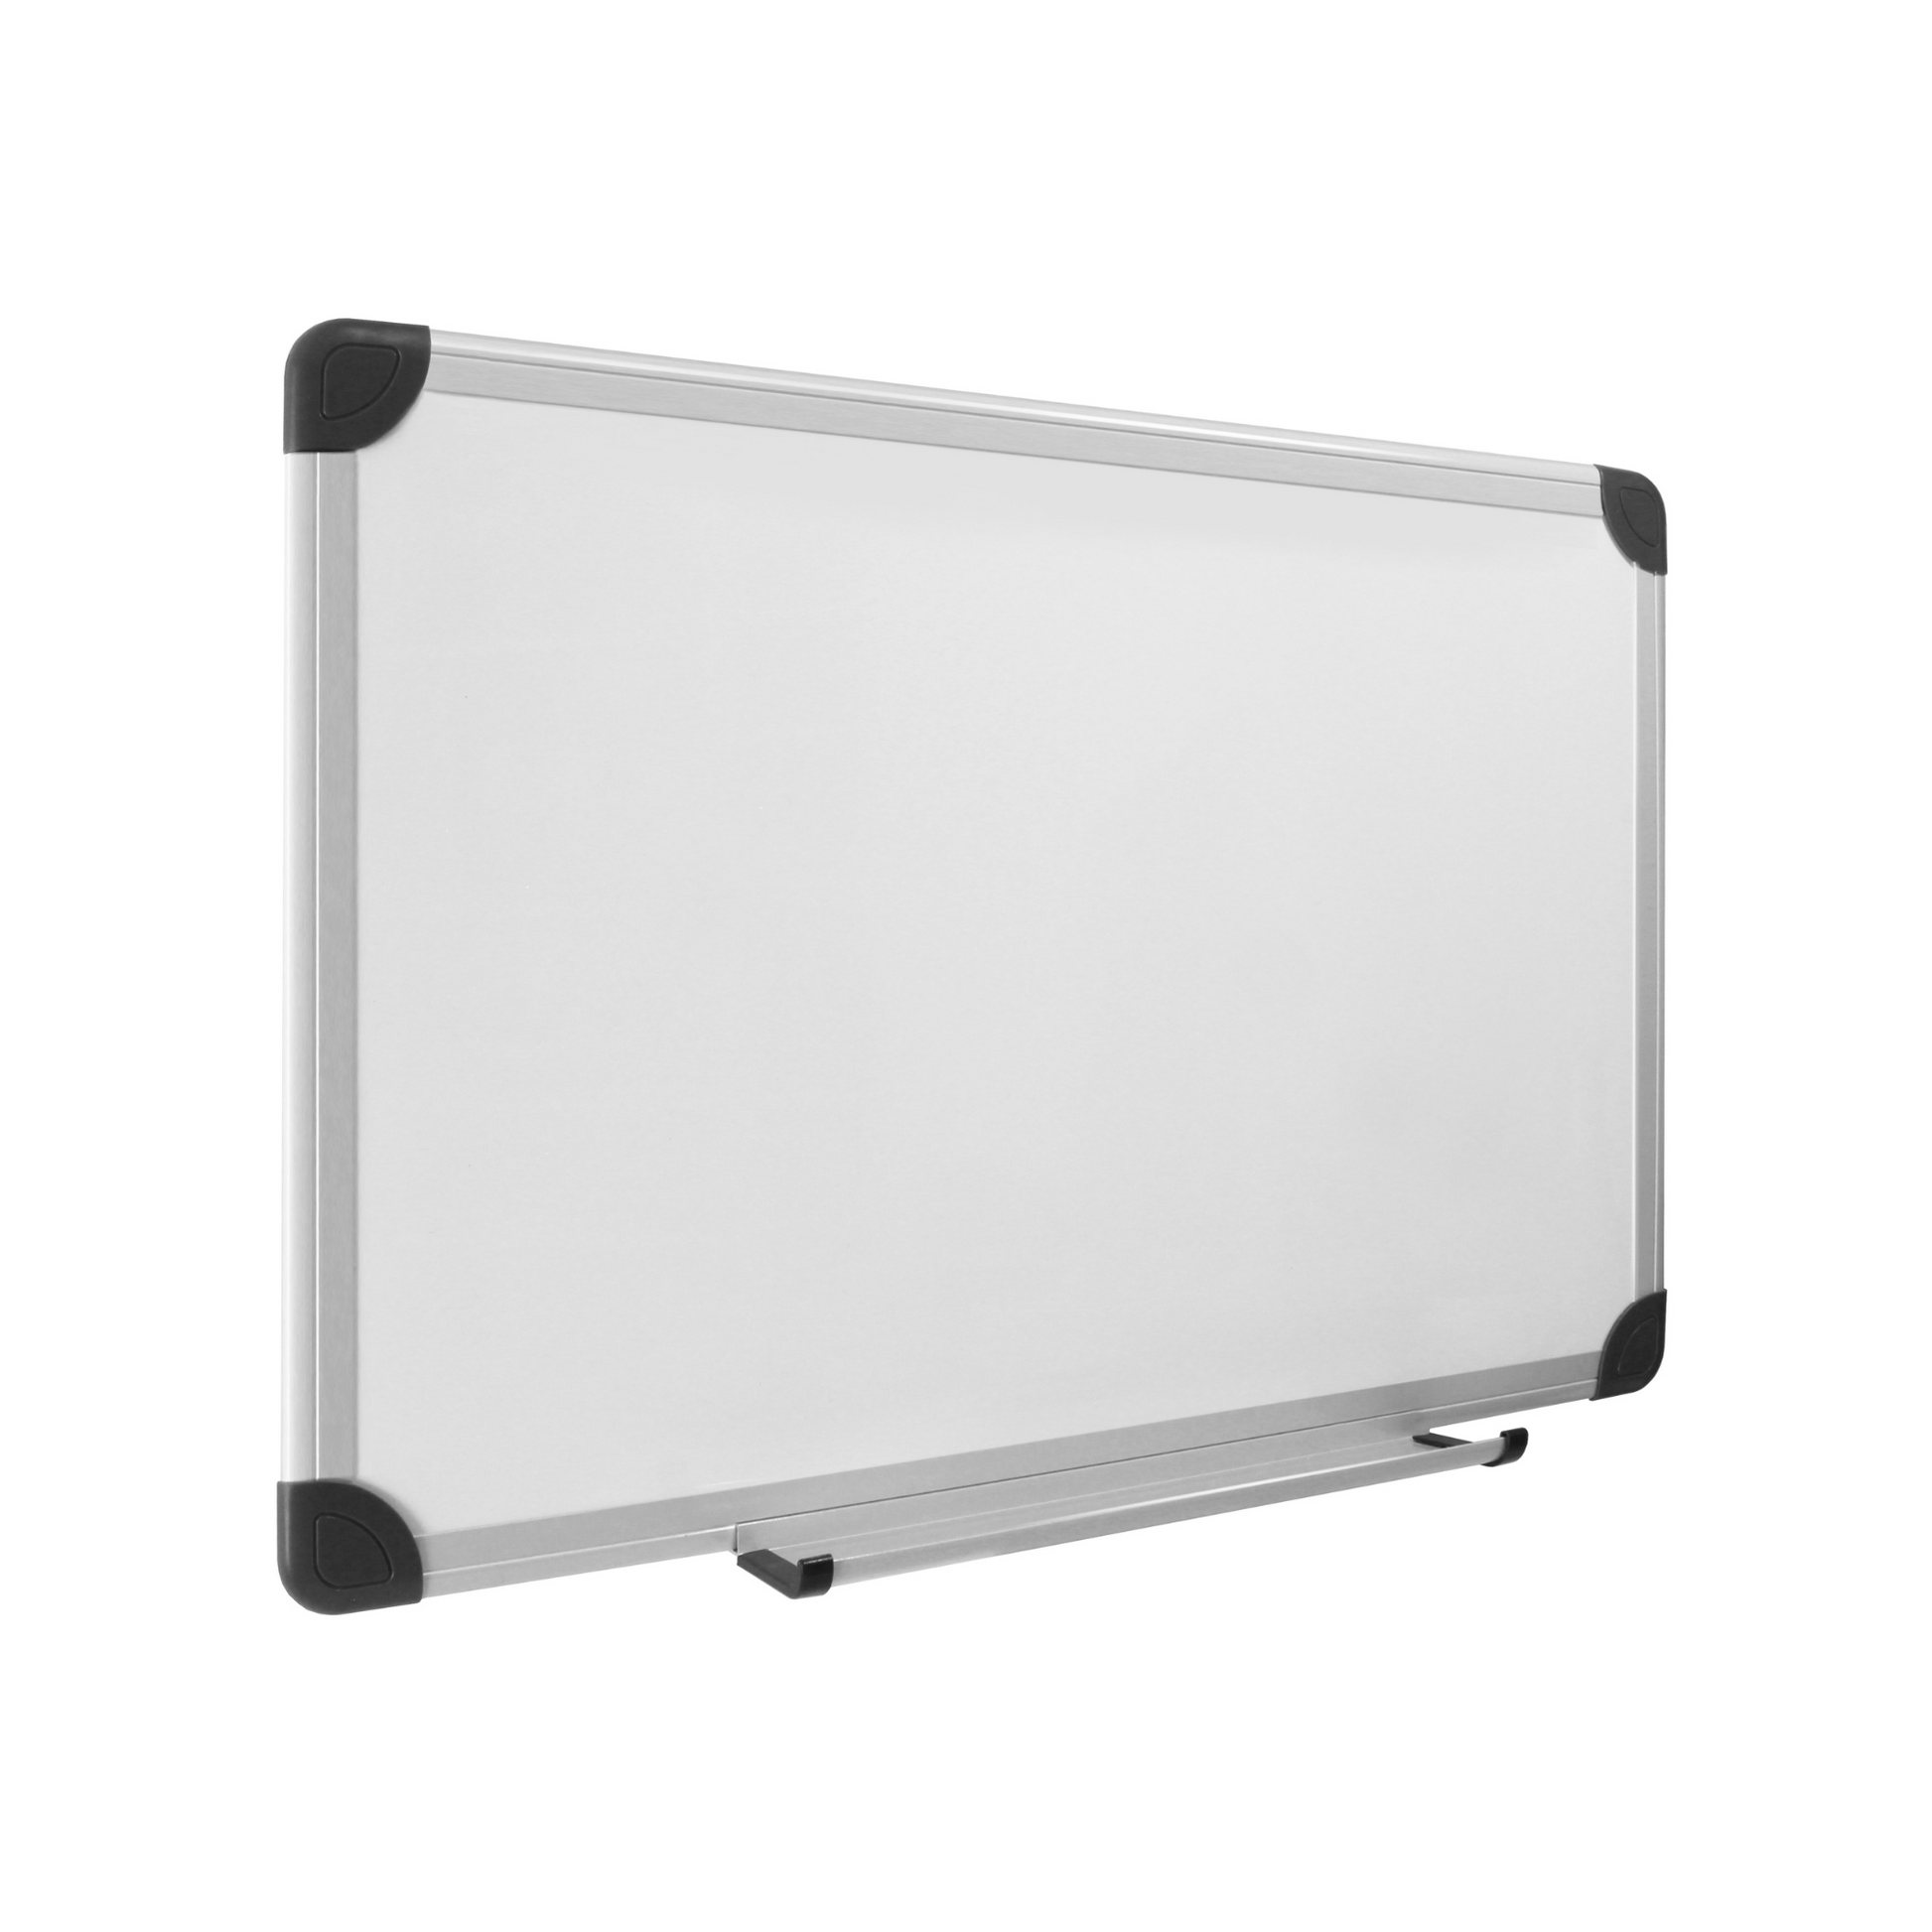 The image depicts a whiteboard with a blank writing surface, framed by a slim aluminium border and reinforced with black corner caps. It has a tray along the bottom edge for holding markers and erasers. This whiteboard is typically used in educational settings, offices, or meeting rooms as a visual aid for presentations, lessons, brainstorming sessions, or for displaying information.